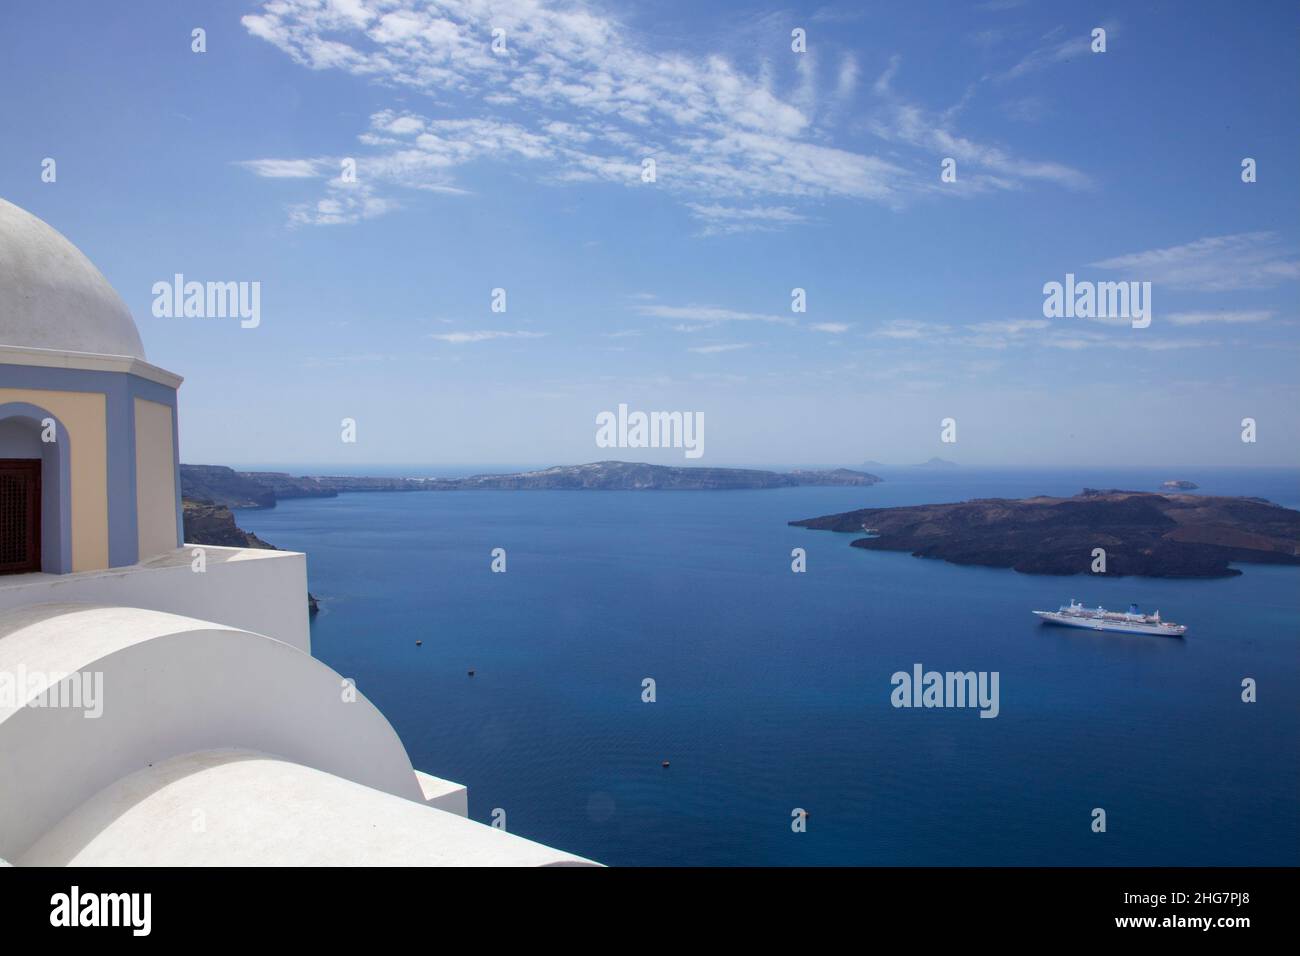 View from Church over Aegean Sea and Cruiseship Stock Photo